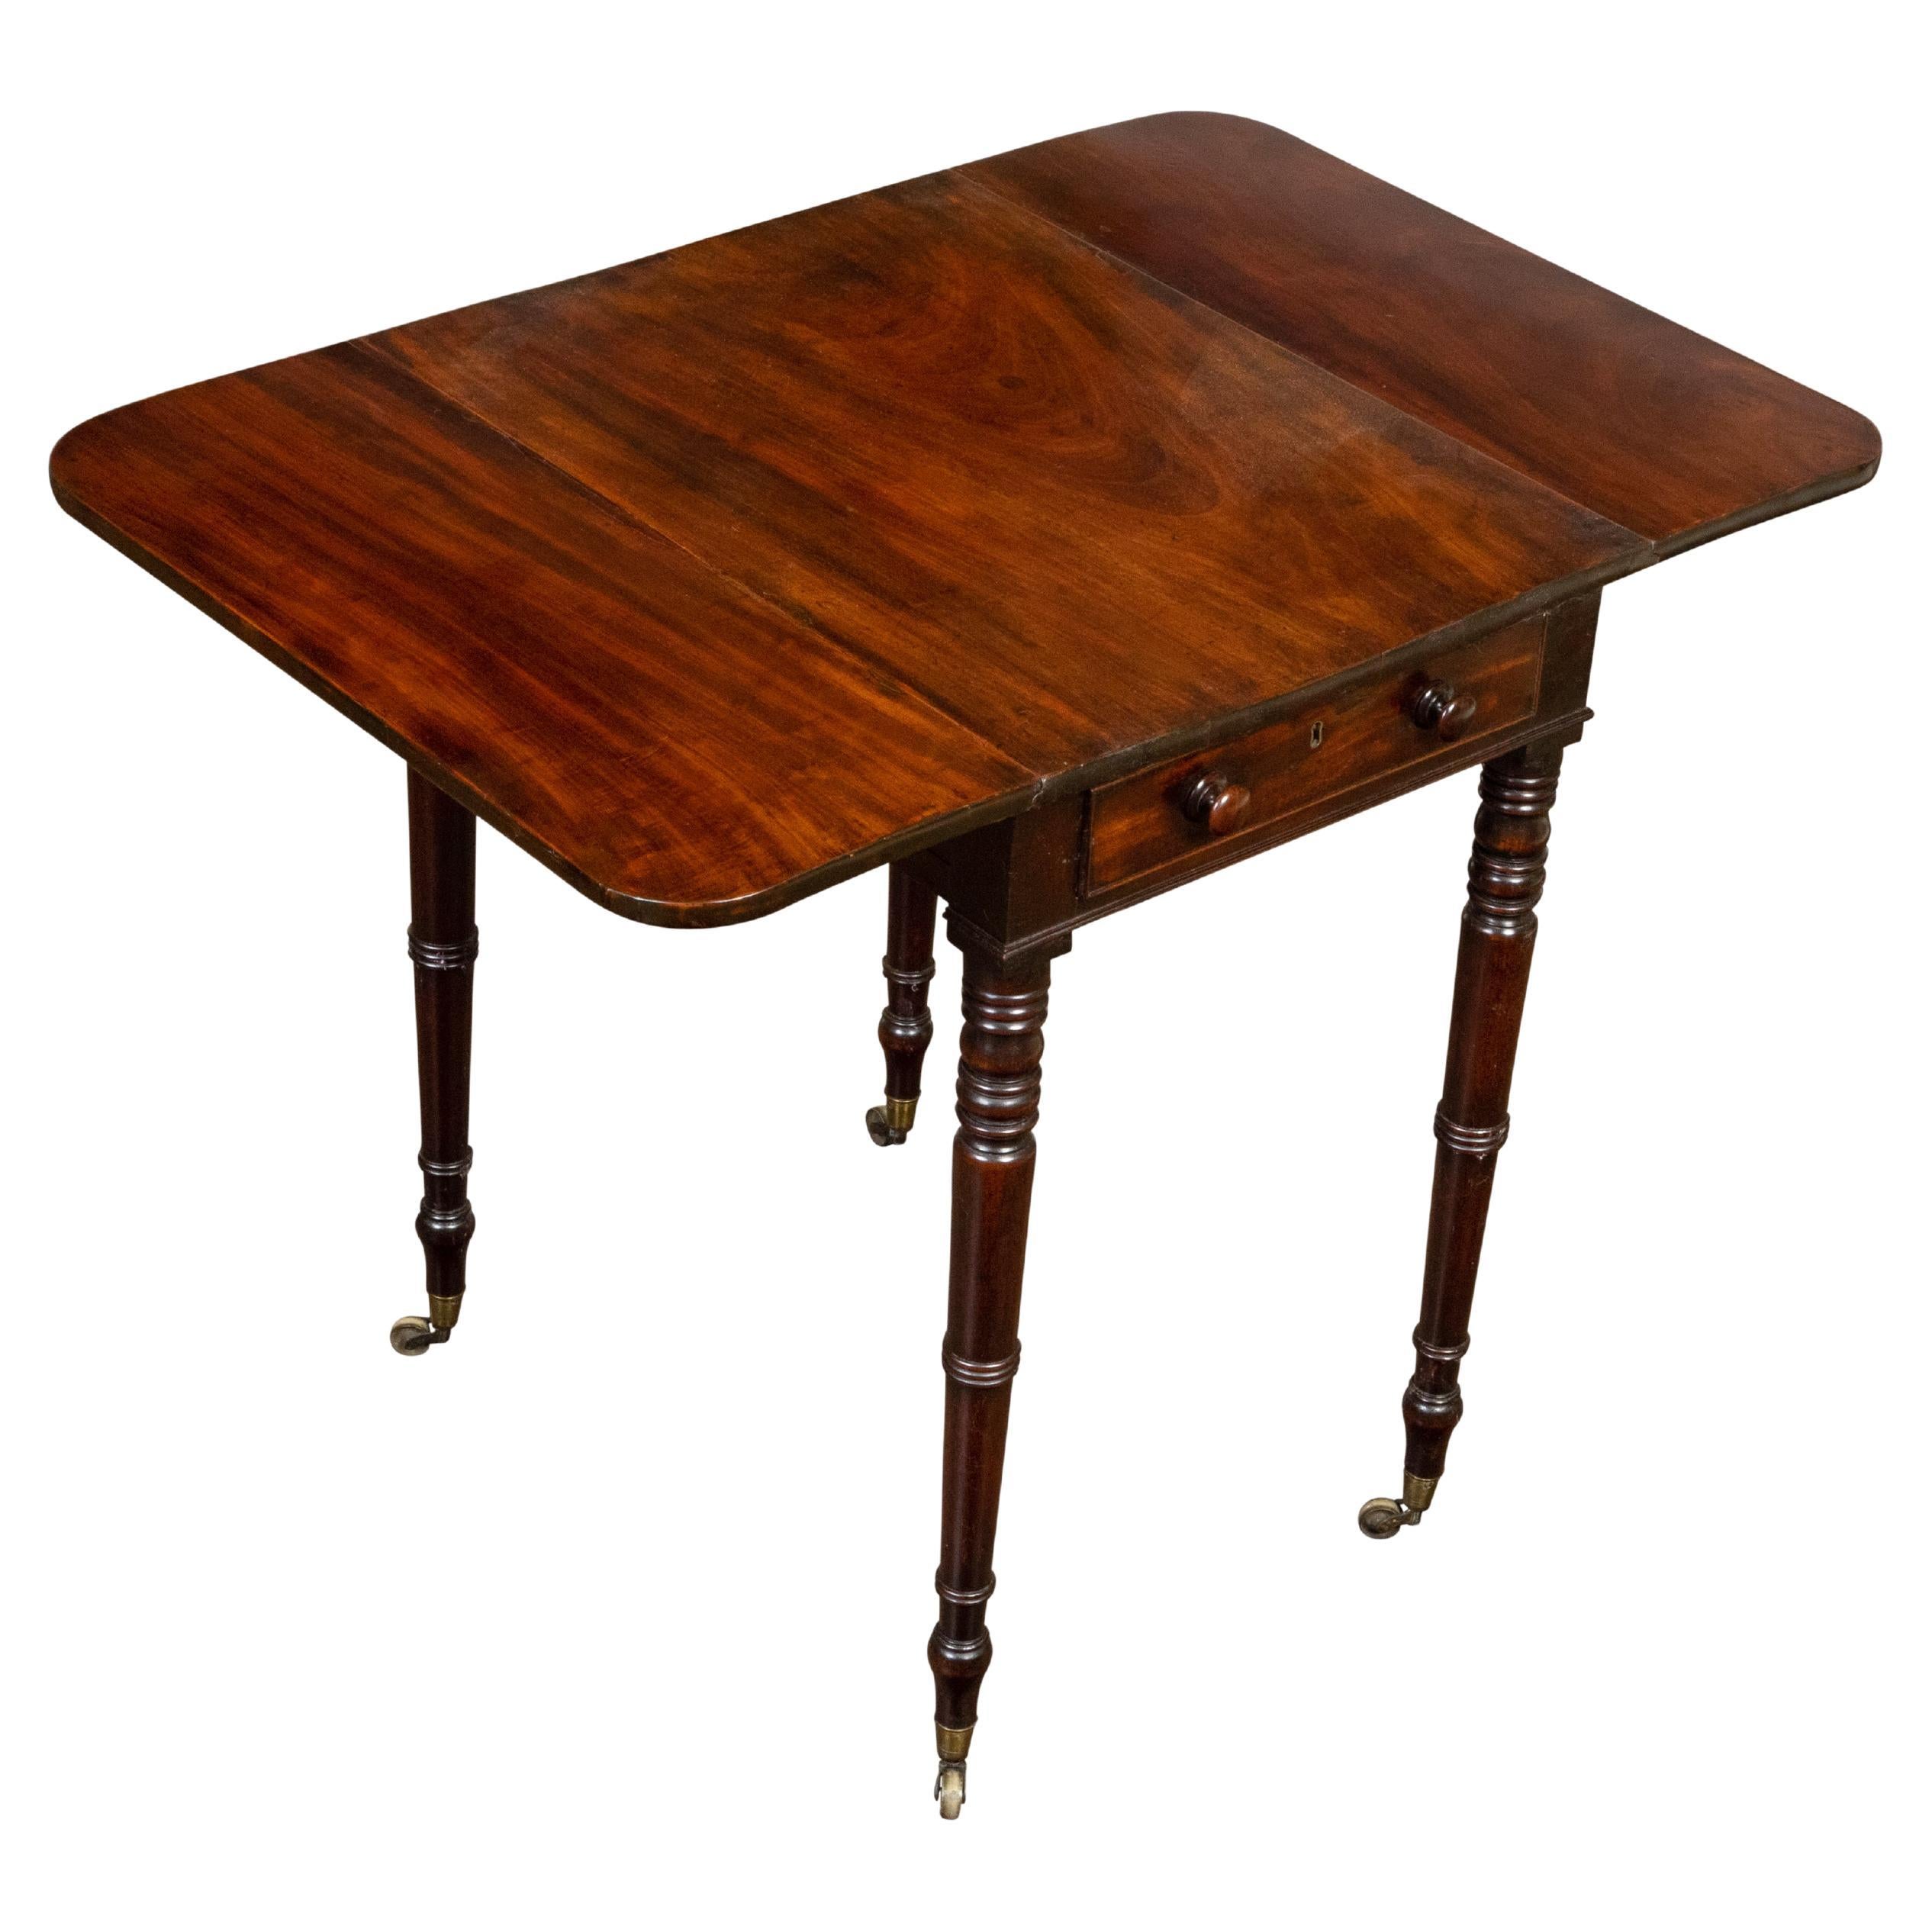 English 1820s Regency Period Mahogany Pembroke Table with Drawer and Turned Legs